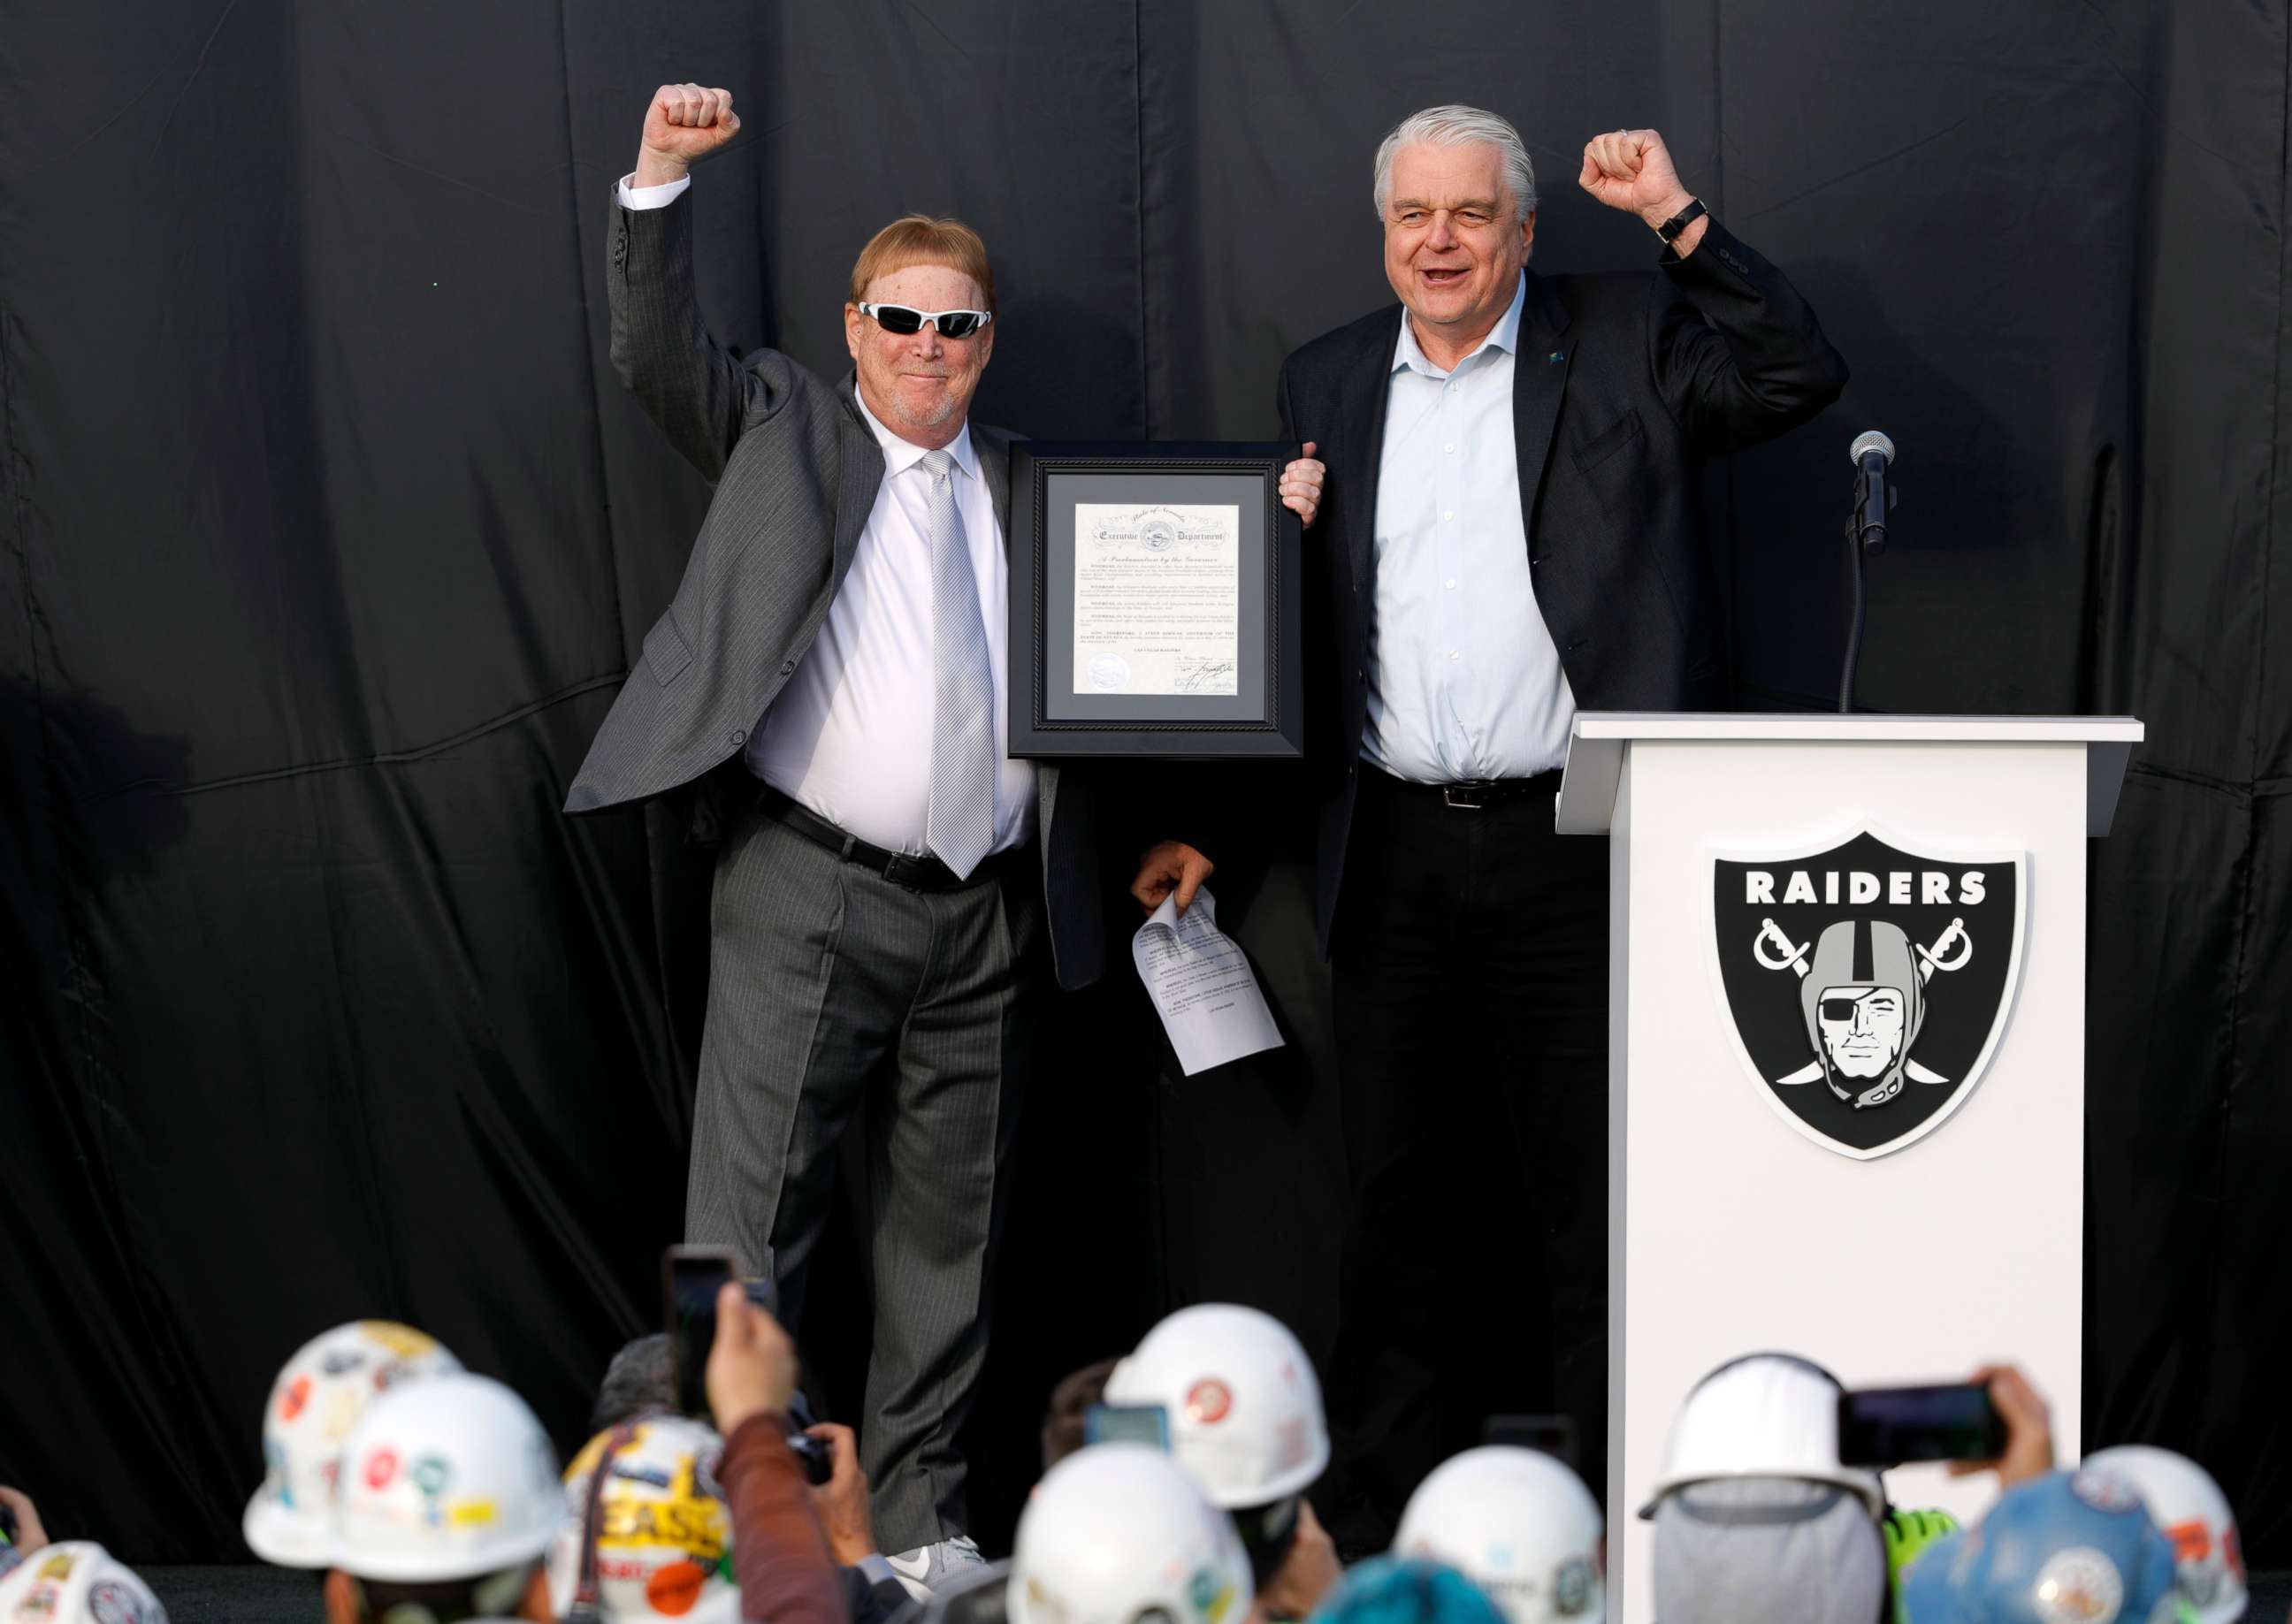 PHOTO: Las Vegas Raiders owner Mark Davis, left, and Nevada Governor Steve Sisolak celebrate during a news conference, officially renaming the Oakland Raiders to the Las Vegas Raiders, in front of Allegiant Stadium in Las Vegas, Jan. 22, 2020.